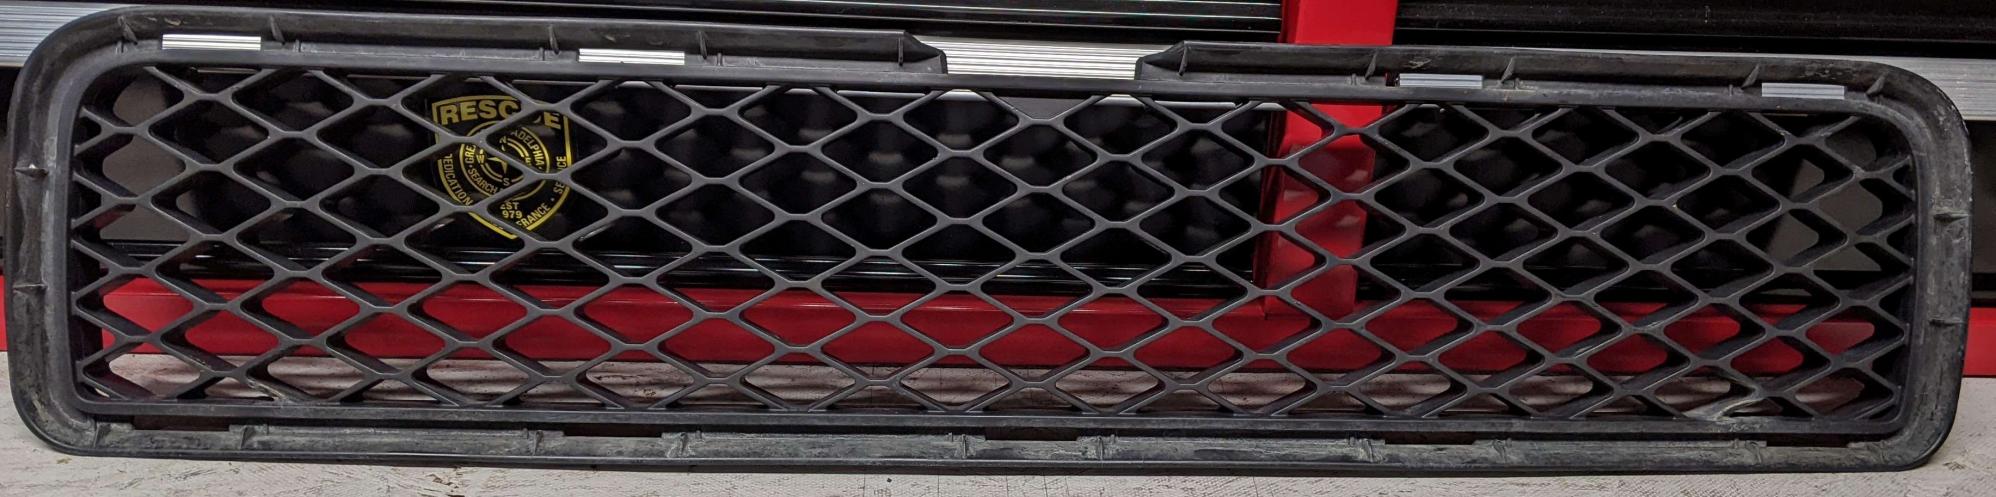 FS: 5th 2012 Gen Trail Edition front grille upper/lower 0 OBO. Philly, PA-grille5-jpg